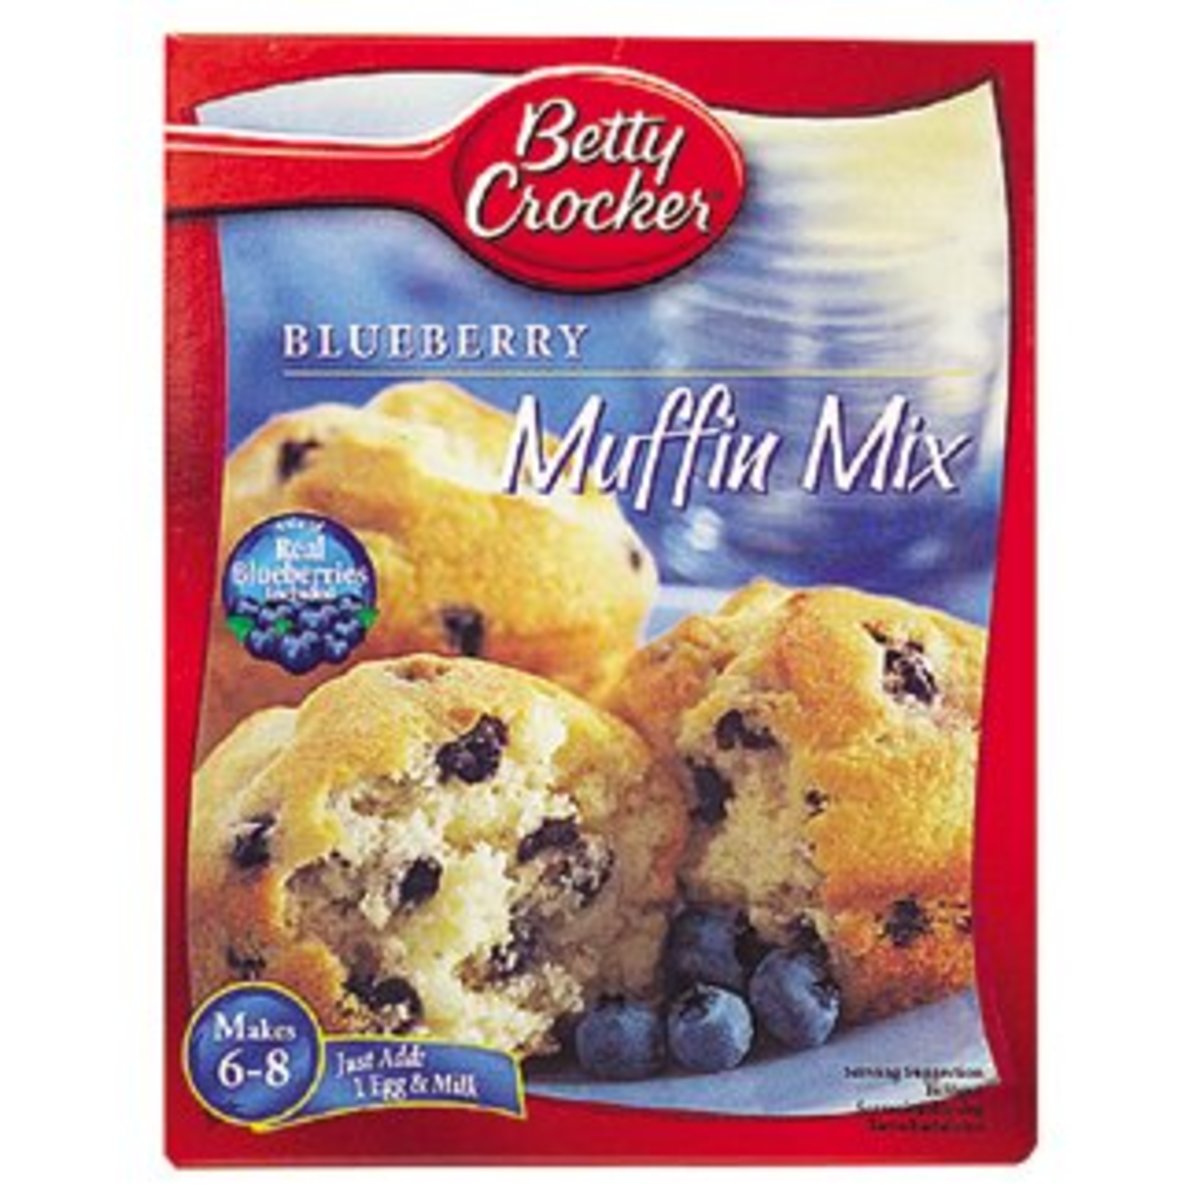 15-ways-to-doctor-blueberry-muffin-mix